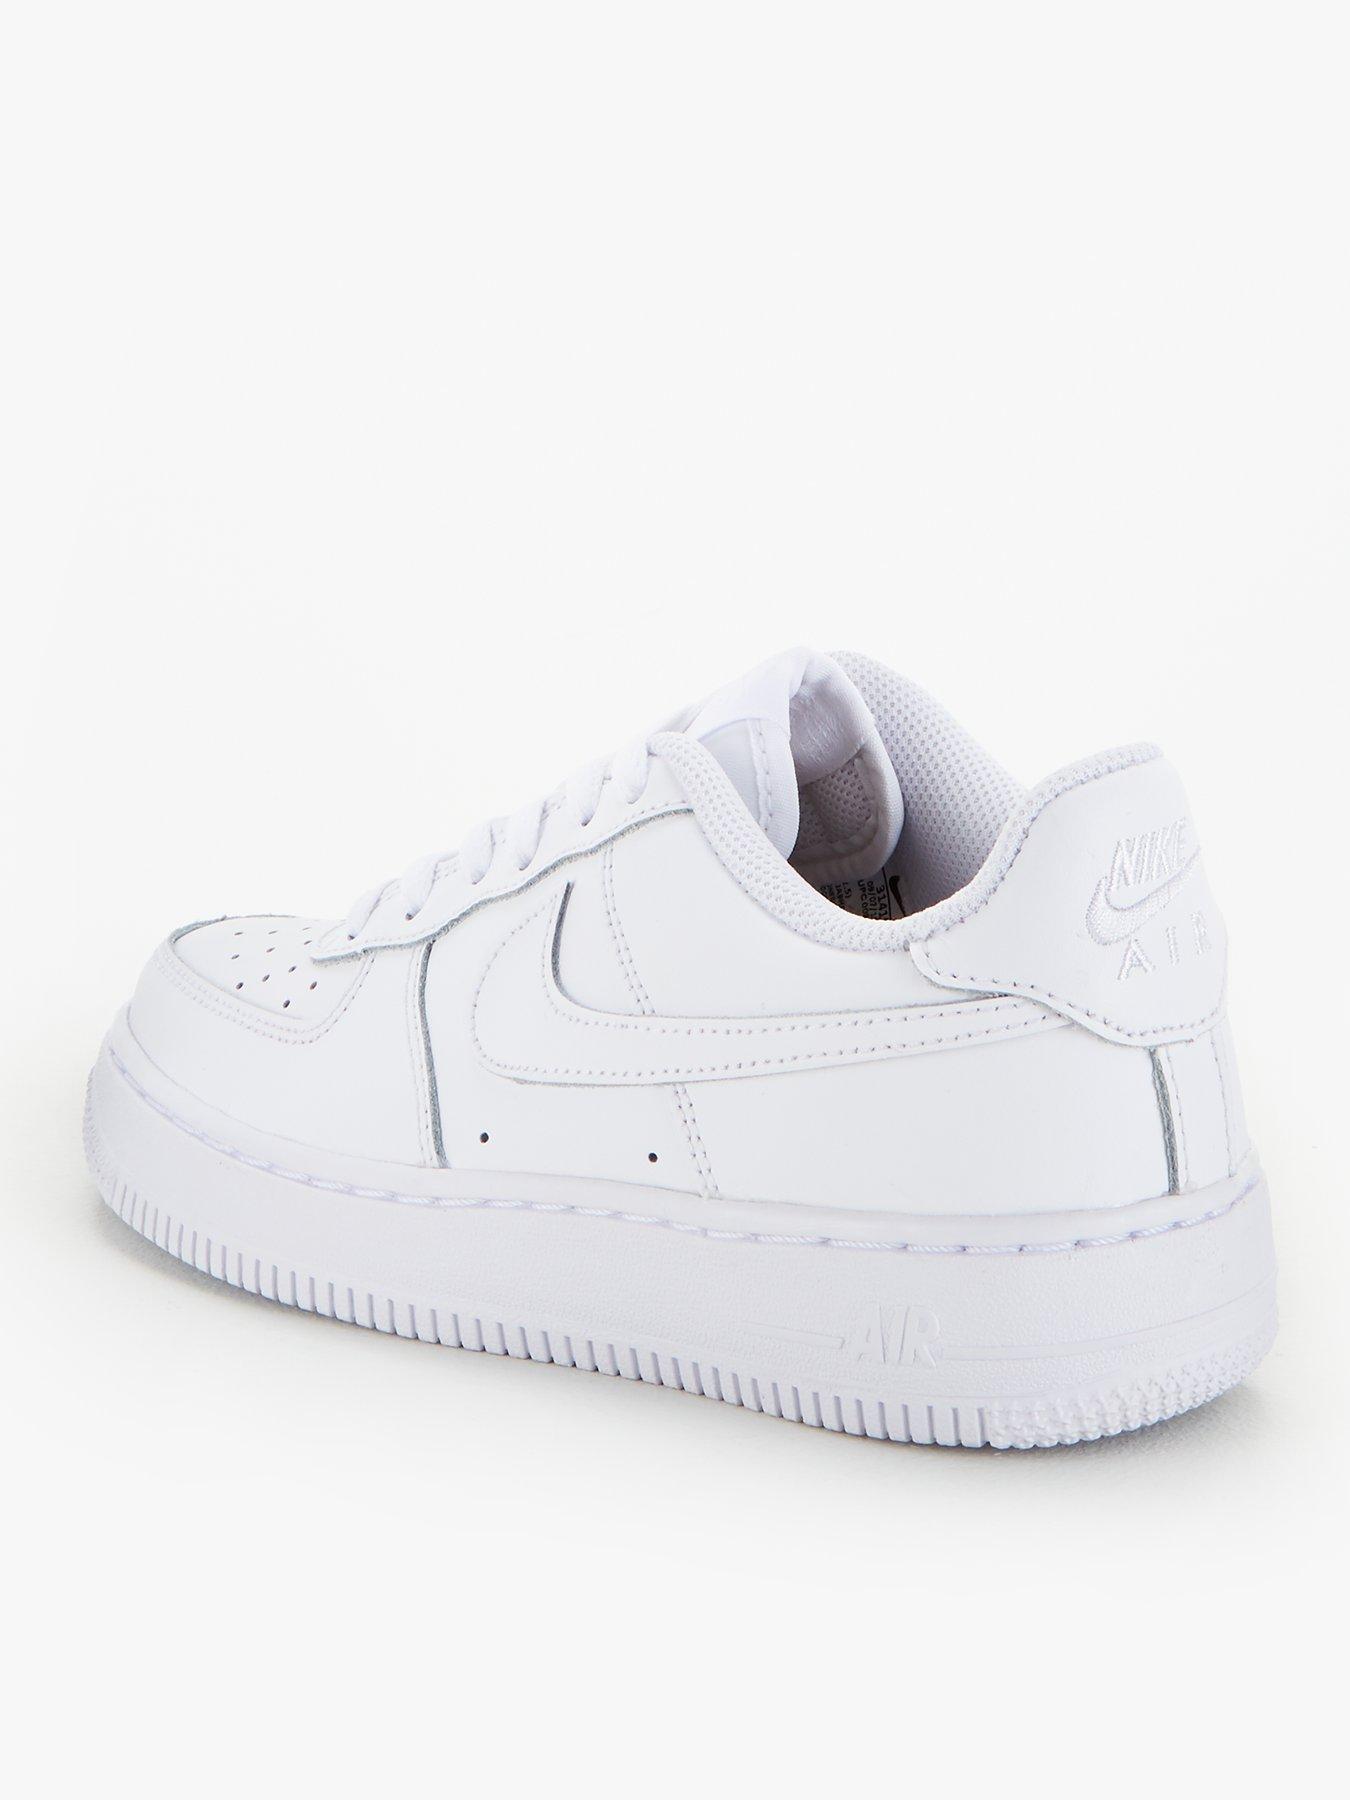 nike air force 1 white junior size 4